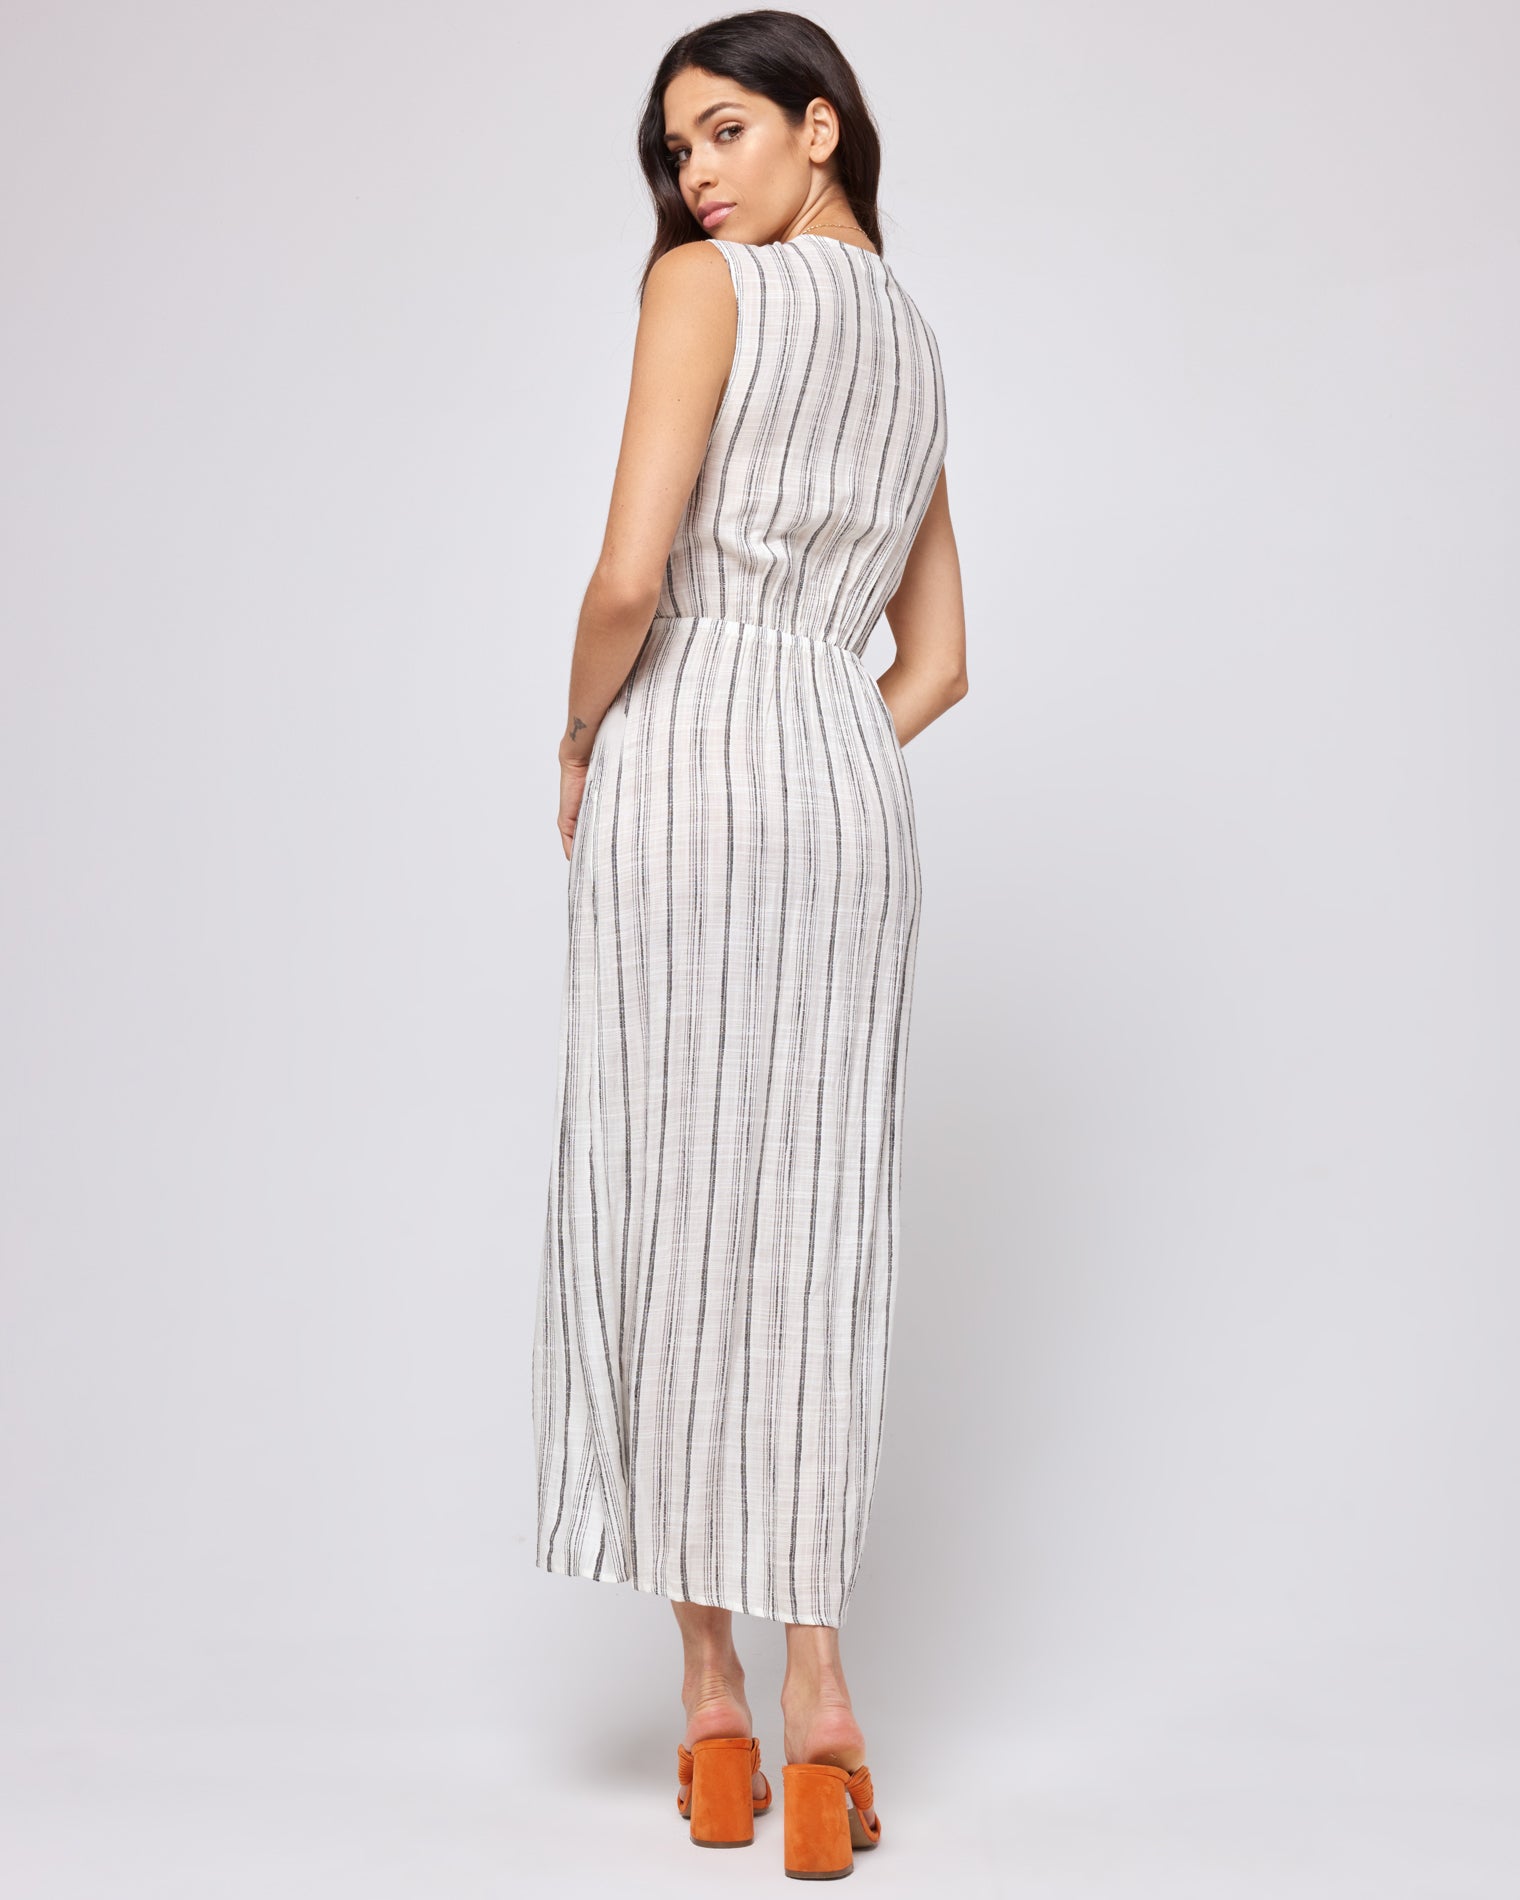 Down The Line Cover-Up - Summer Nights Stripe Summer Nights Stripe | Model: Julianna (size: S)